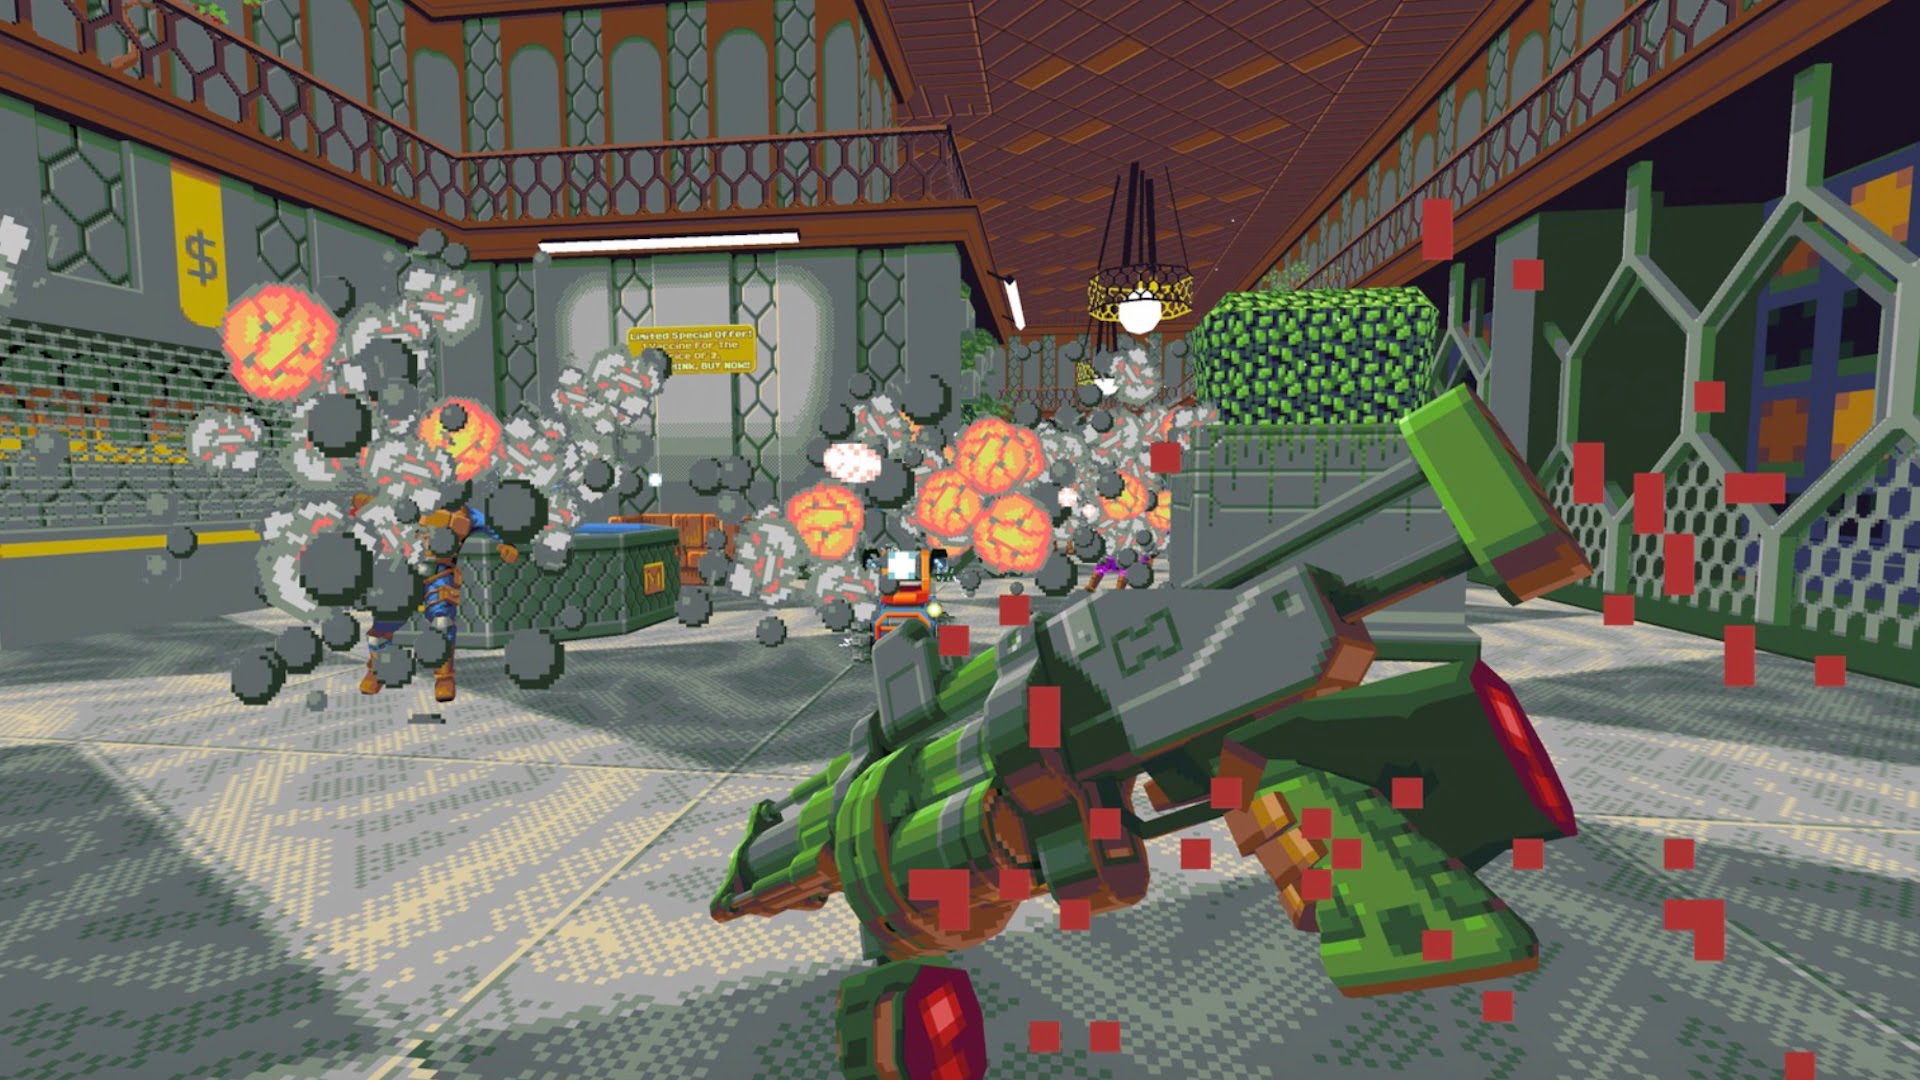 "Compound" developer is working on a new VR Retro FPS